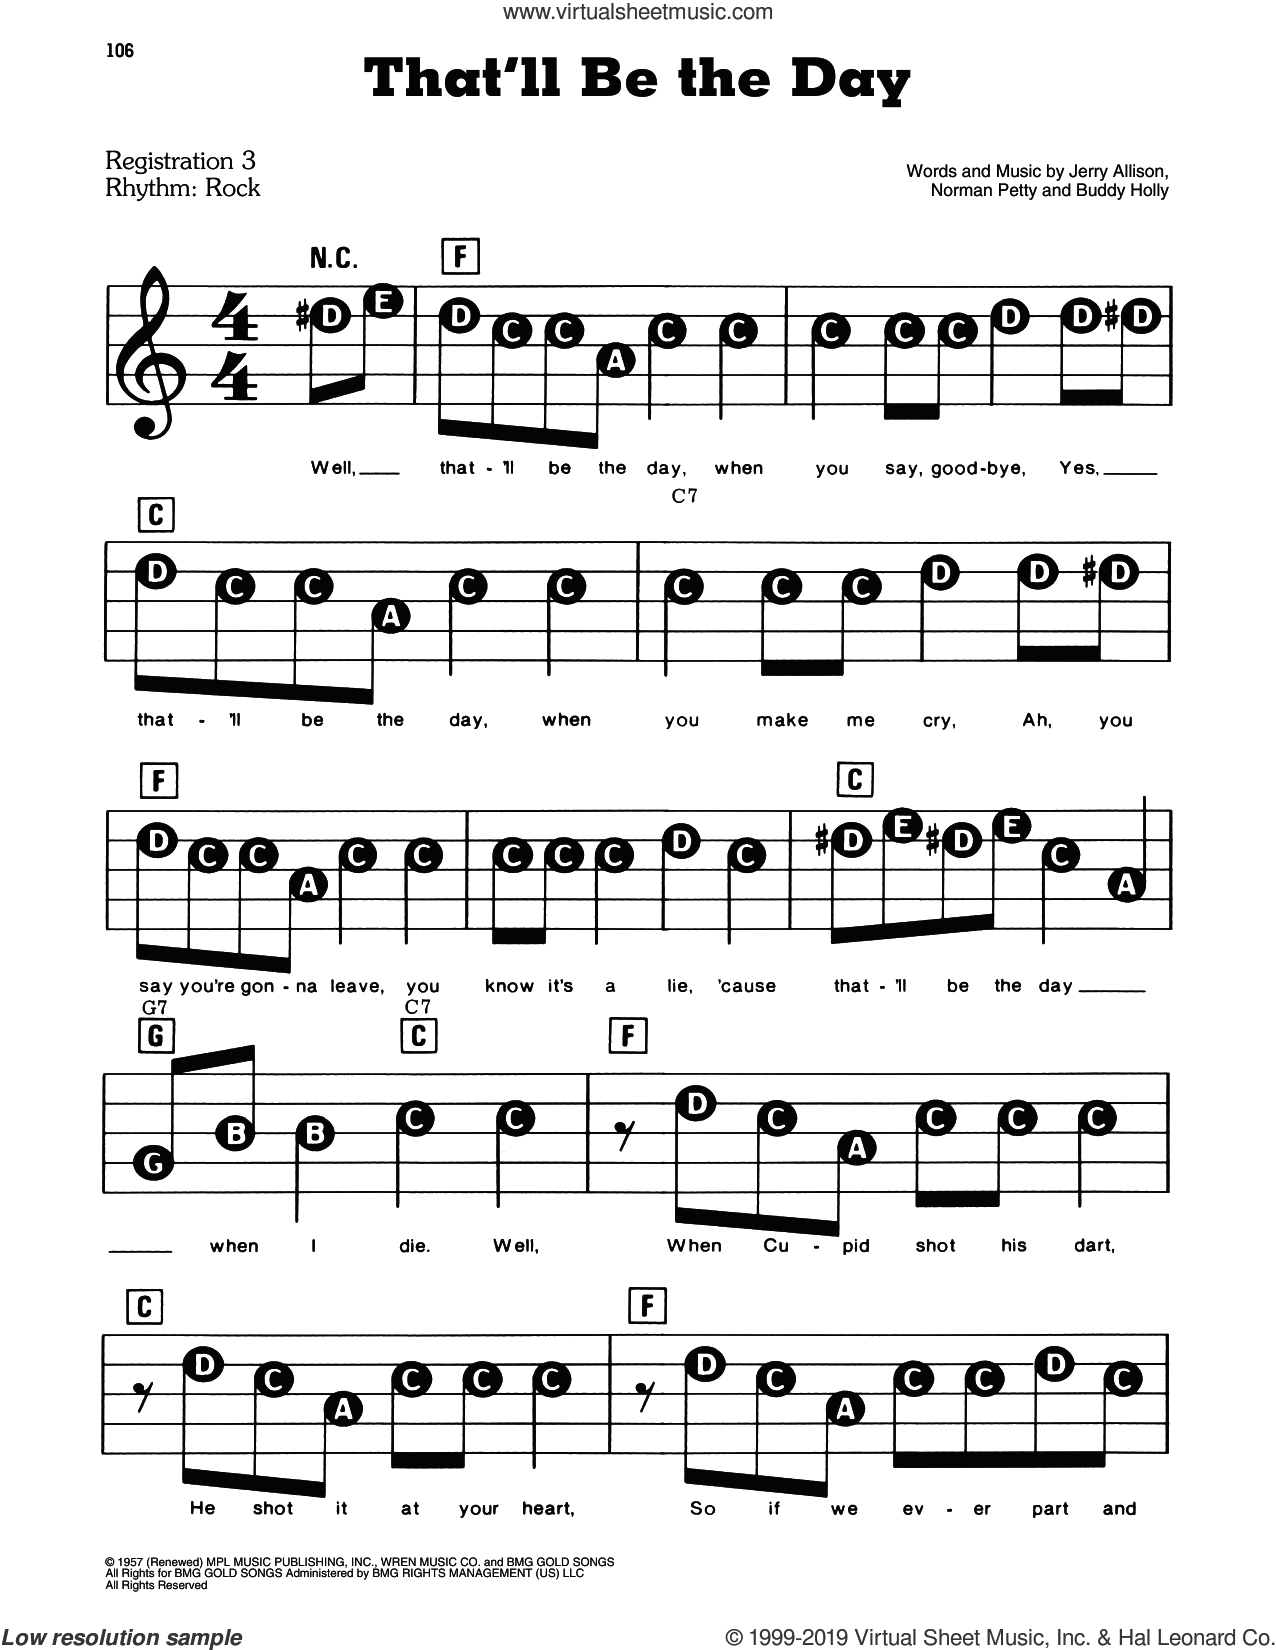 That'll Be The Day sheet music for piano or keyboard (E-Z Play)